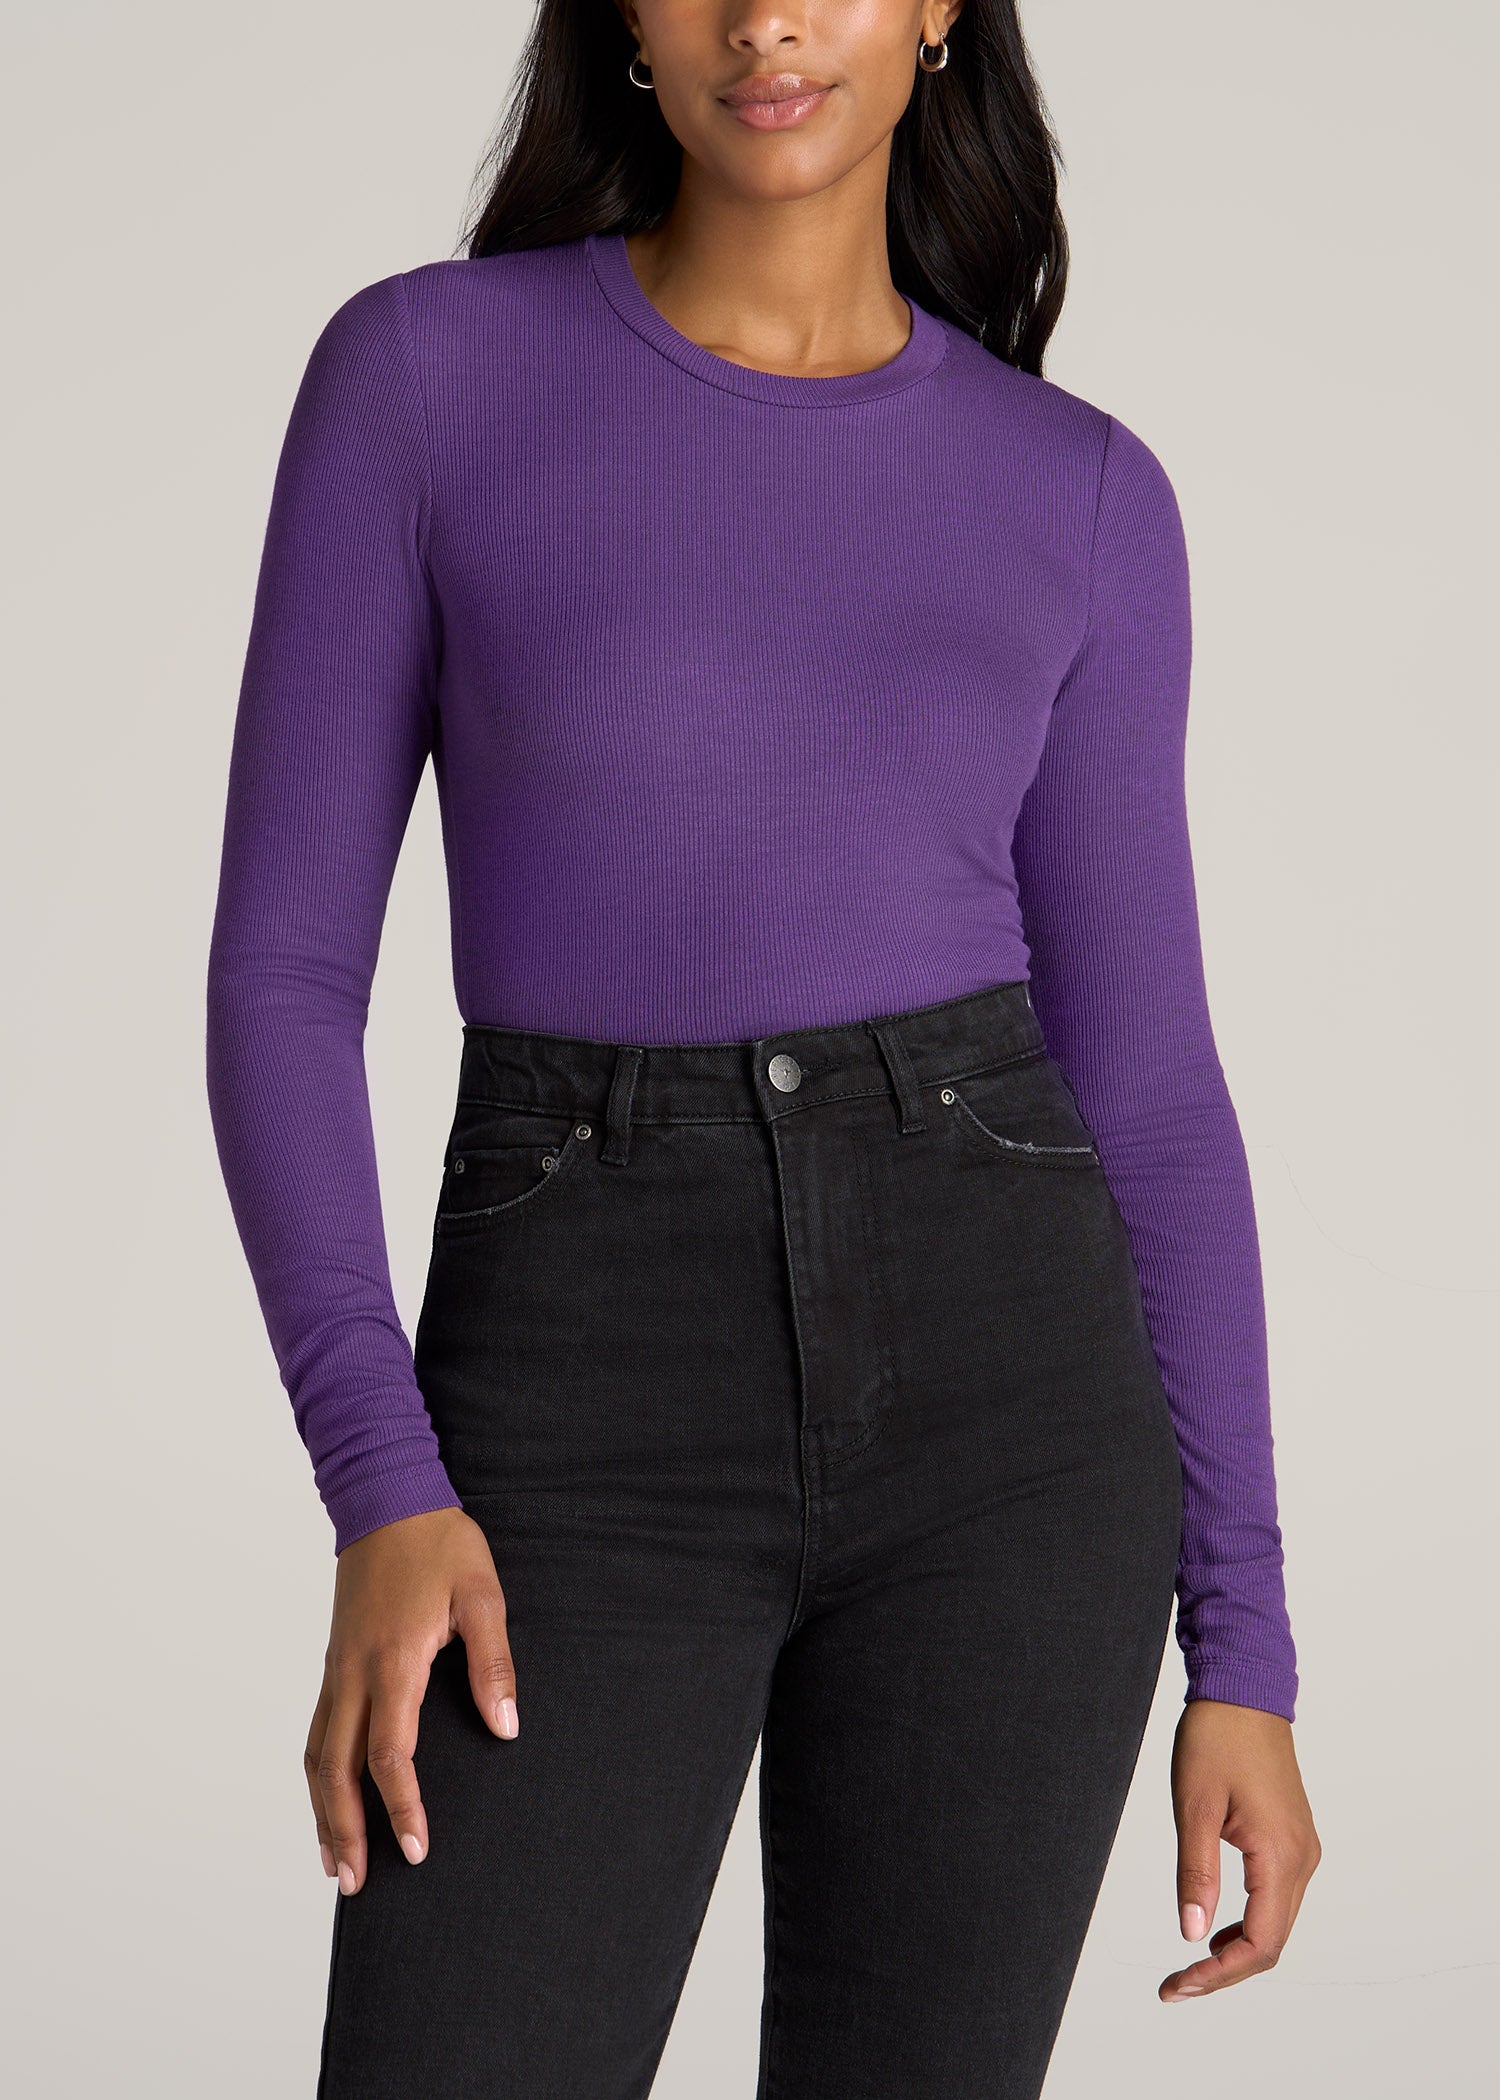 FITTED Ribbed Long Sleeve Tee in Aster Purple - Tall Women's Shirts